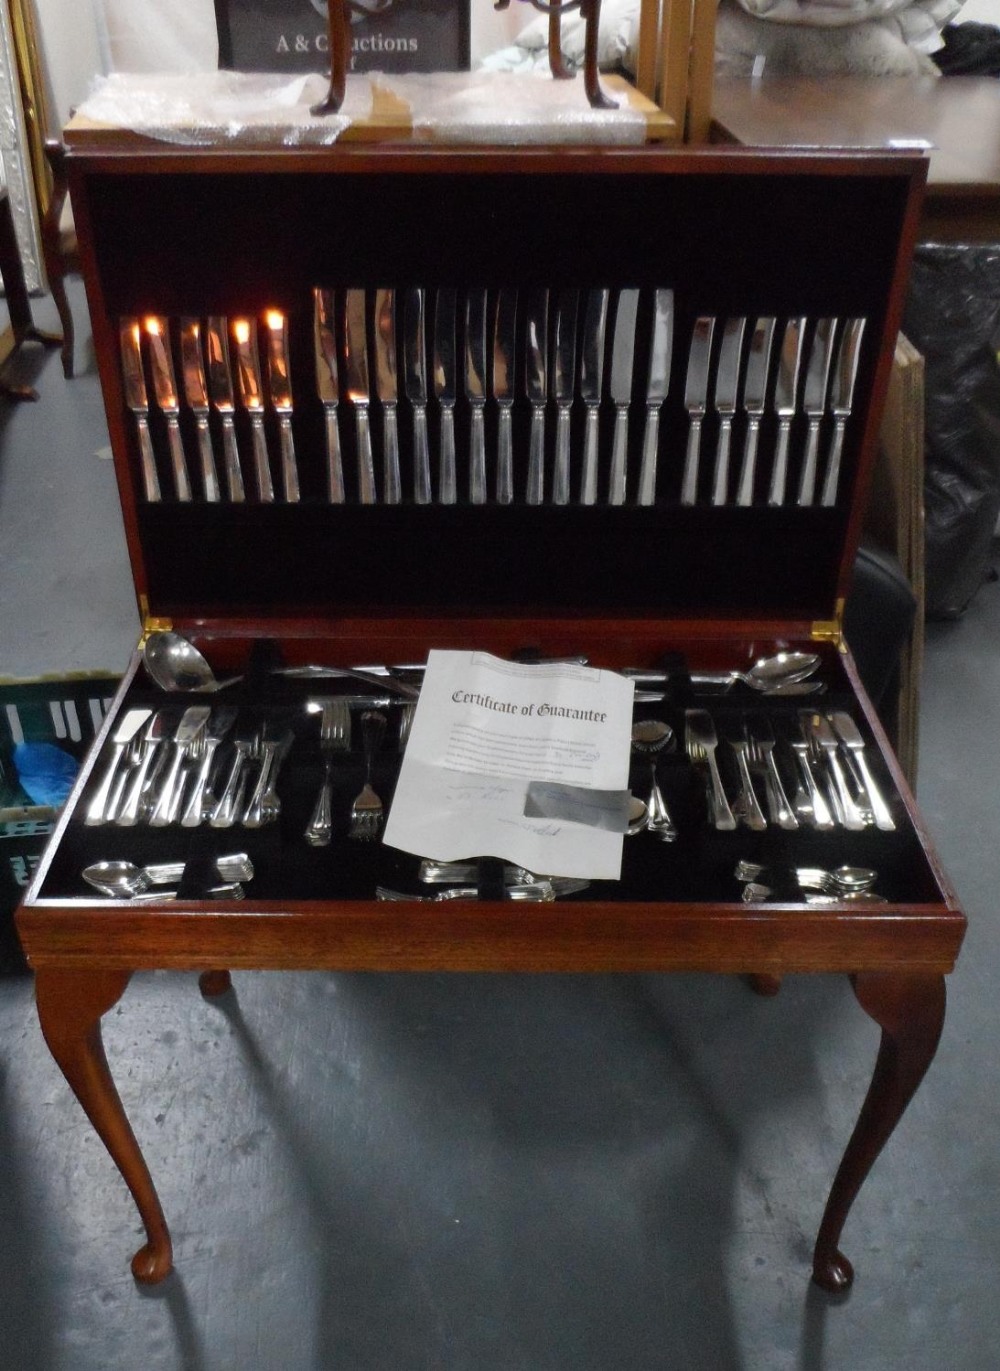 Complete set (140 piece) of 1984 Sheffield cutlery collection in free standing, leather topped chest